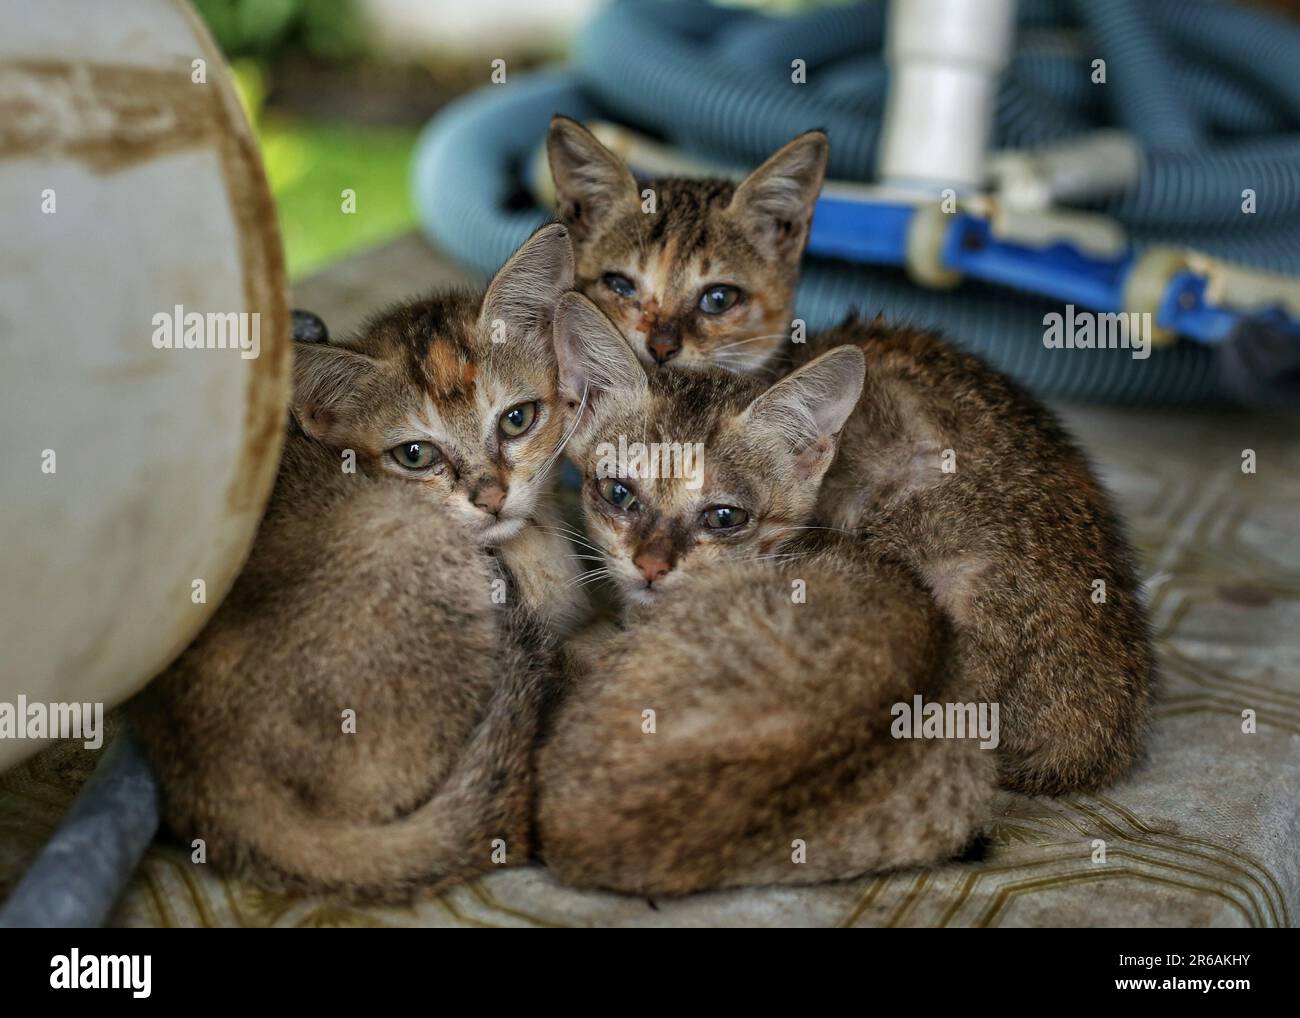 Three adorable kittens cuddle up together to gaze at the camera, while a small colorful ball lies close by Stock Photo